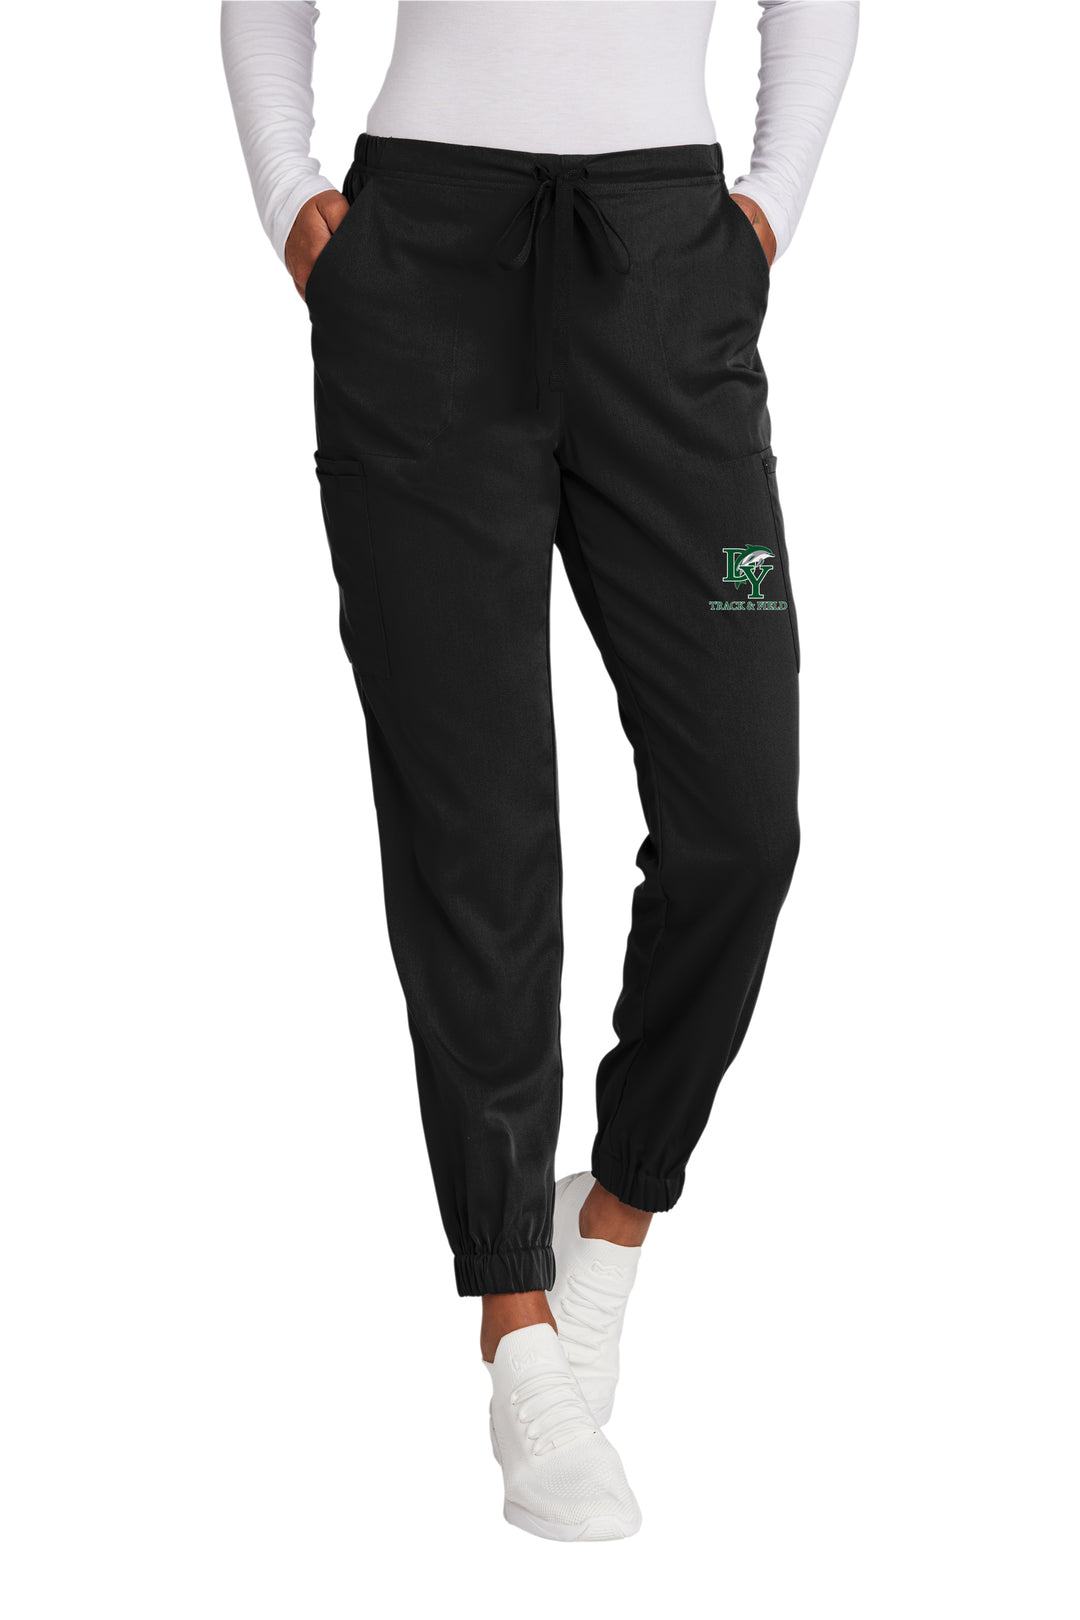 Dennis Yarmouth Track and Field Women's Premiere Flex Jogger Pants (WW4258)